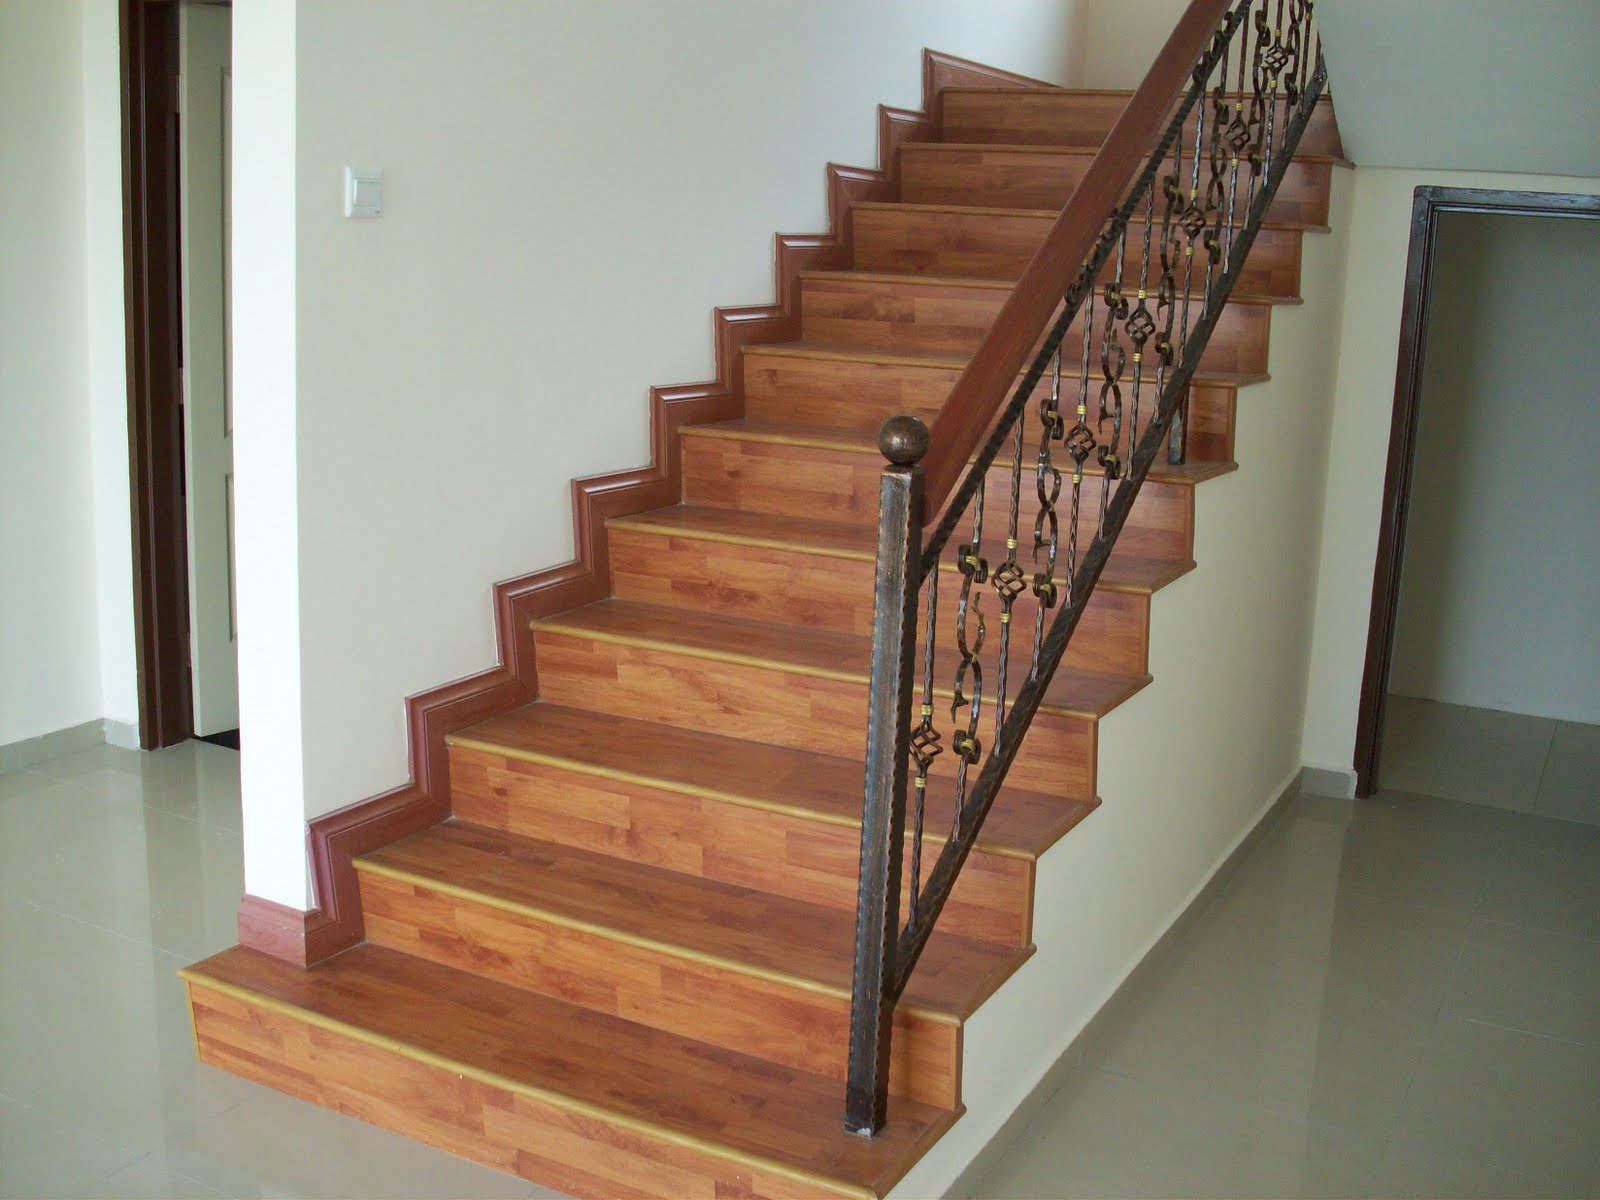 How To Install Wood Flooring On Stairs, How Install Wood Flooring On Stairs